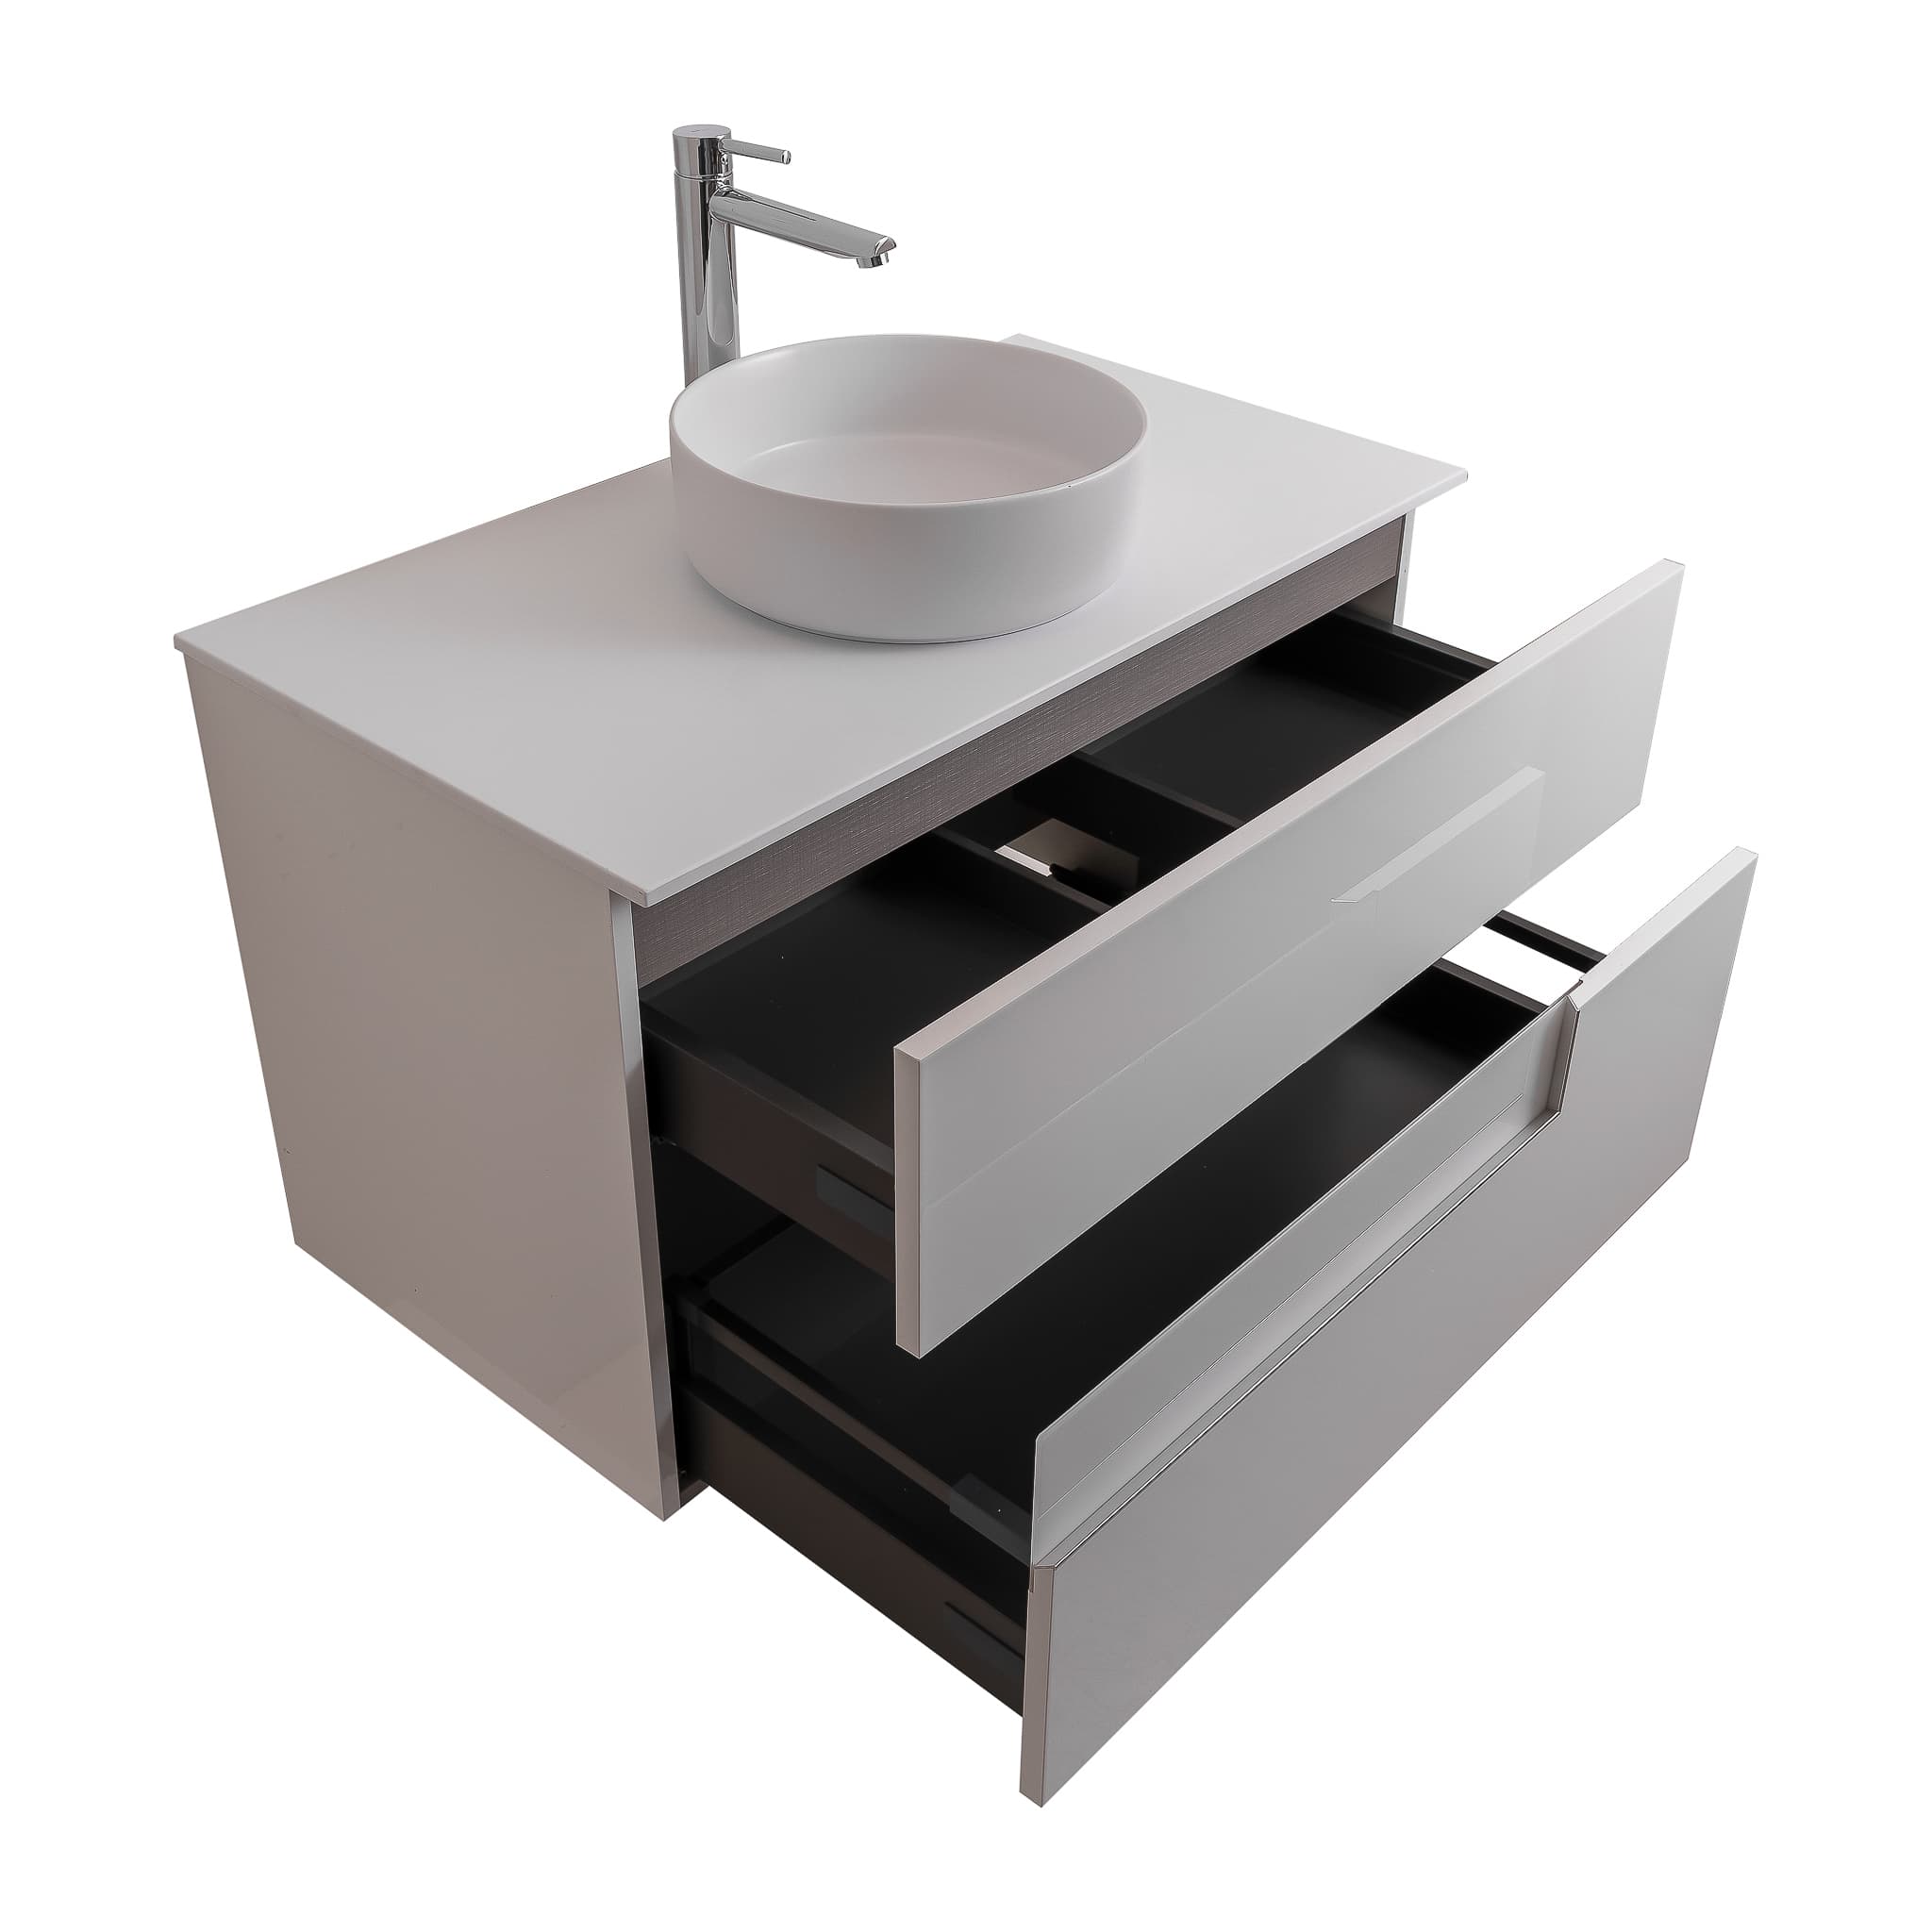 Vision 35.5 White High Gloss Cabinet, Ares White Top And Ares White Ceramic Basin, Wall Mounted Modern Vanity Set